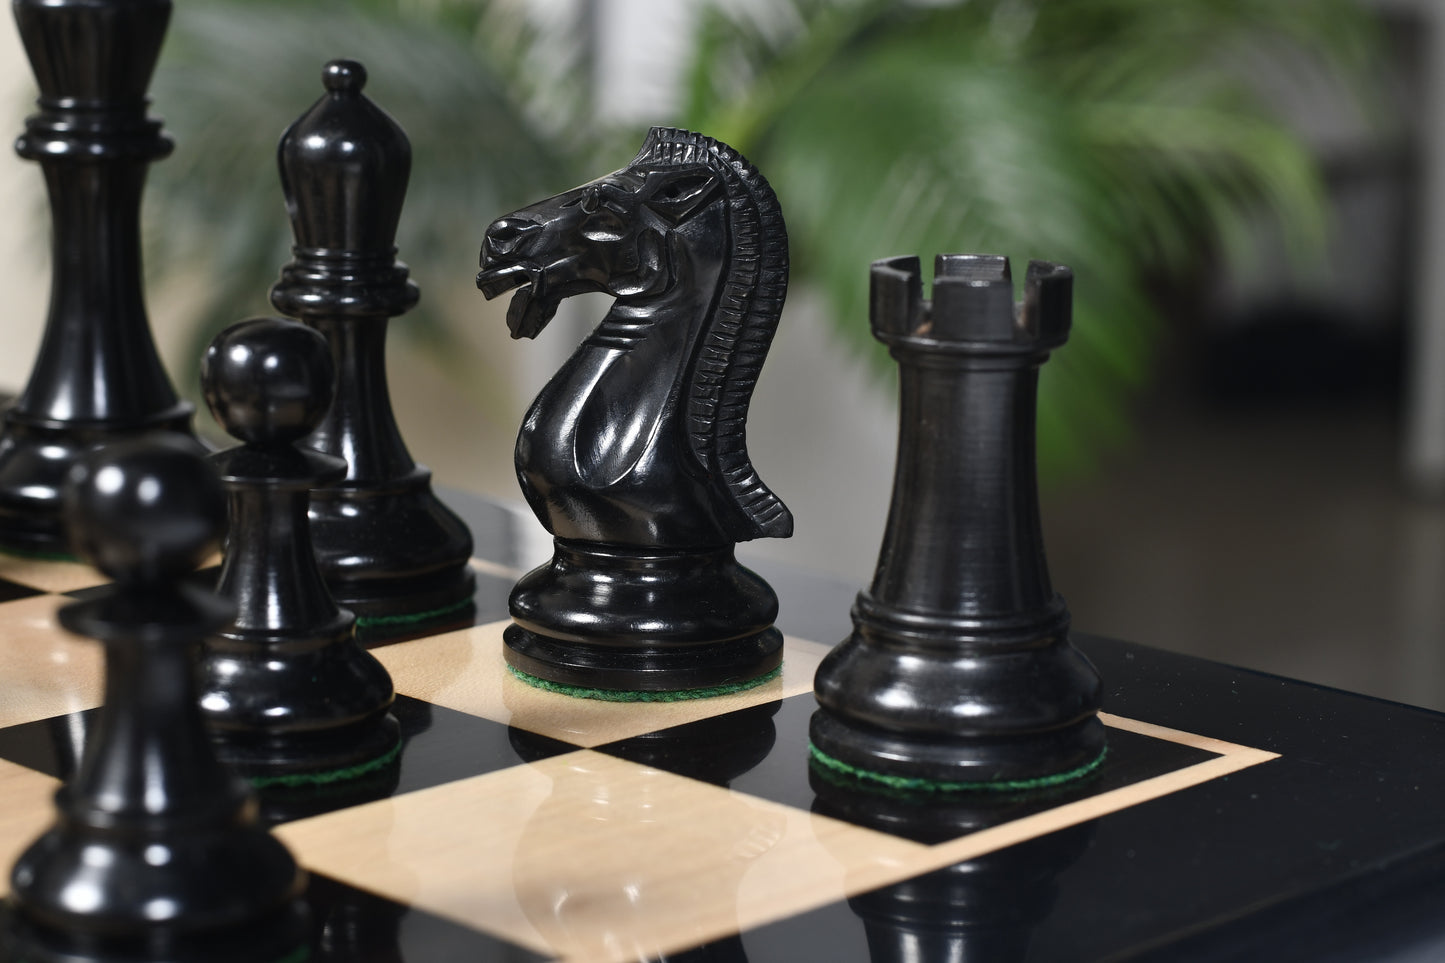 The Elgin Marble Knight Staunton Weighted Chess Pieces in Genuine Ebony Wood and Boxwood - 4.0 inch King